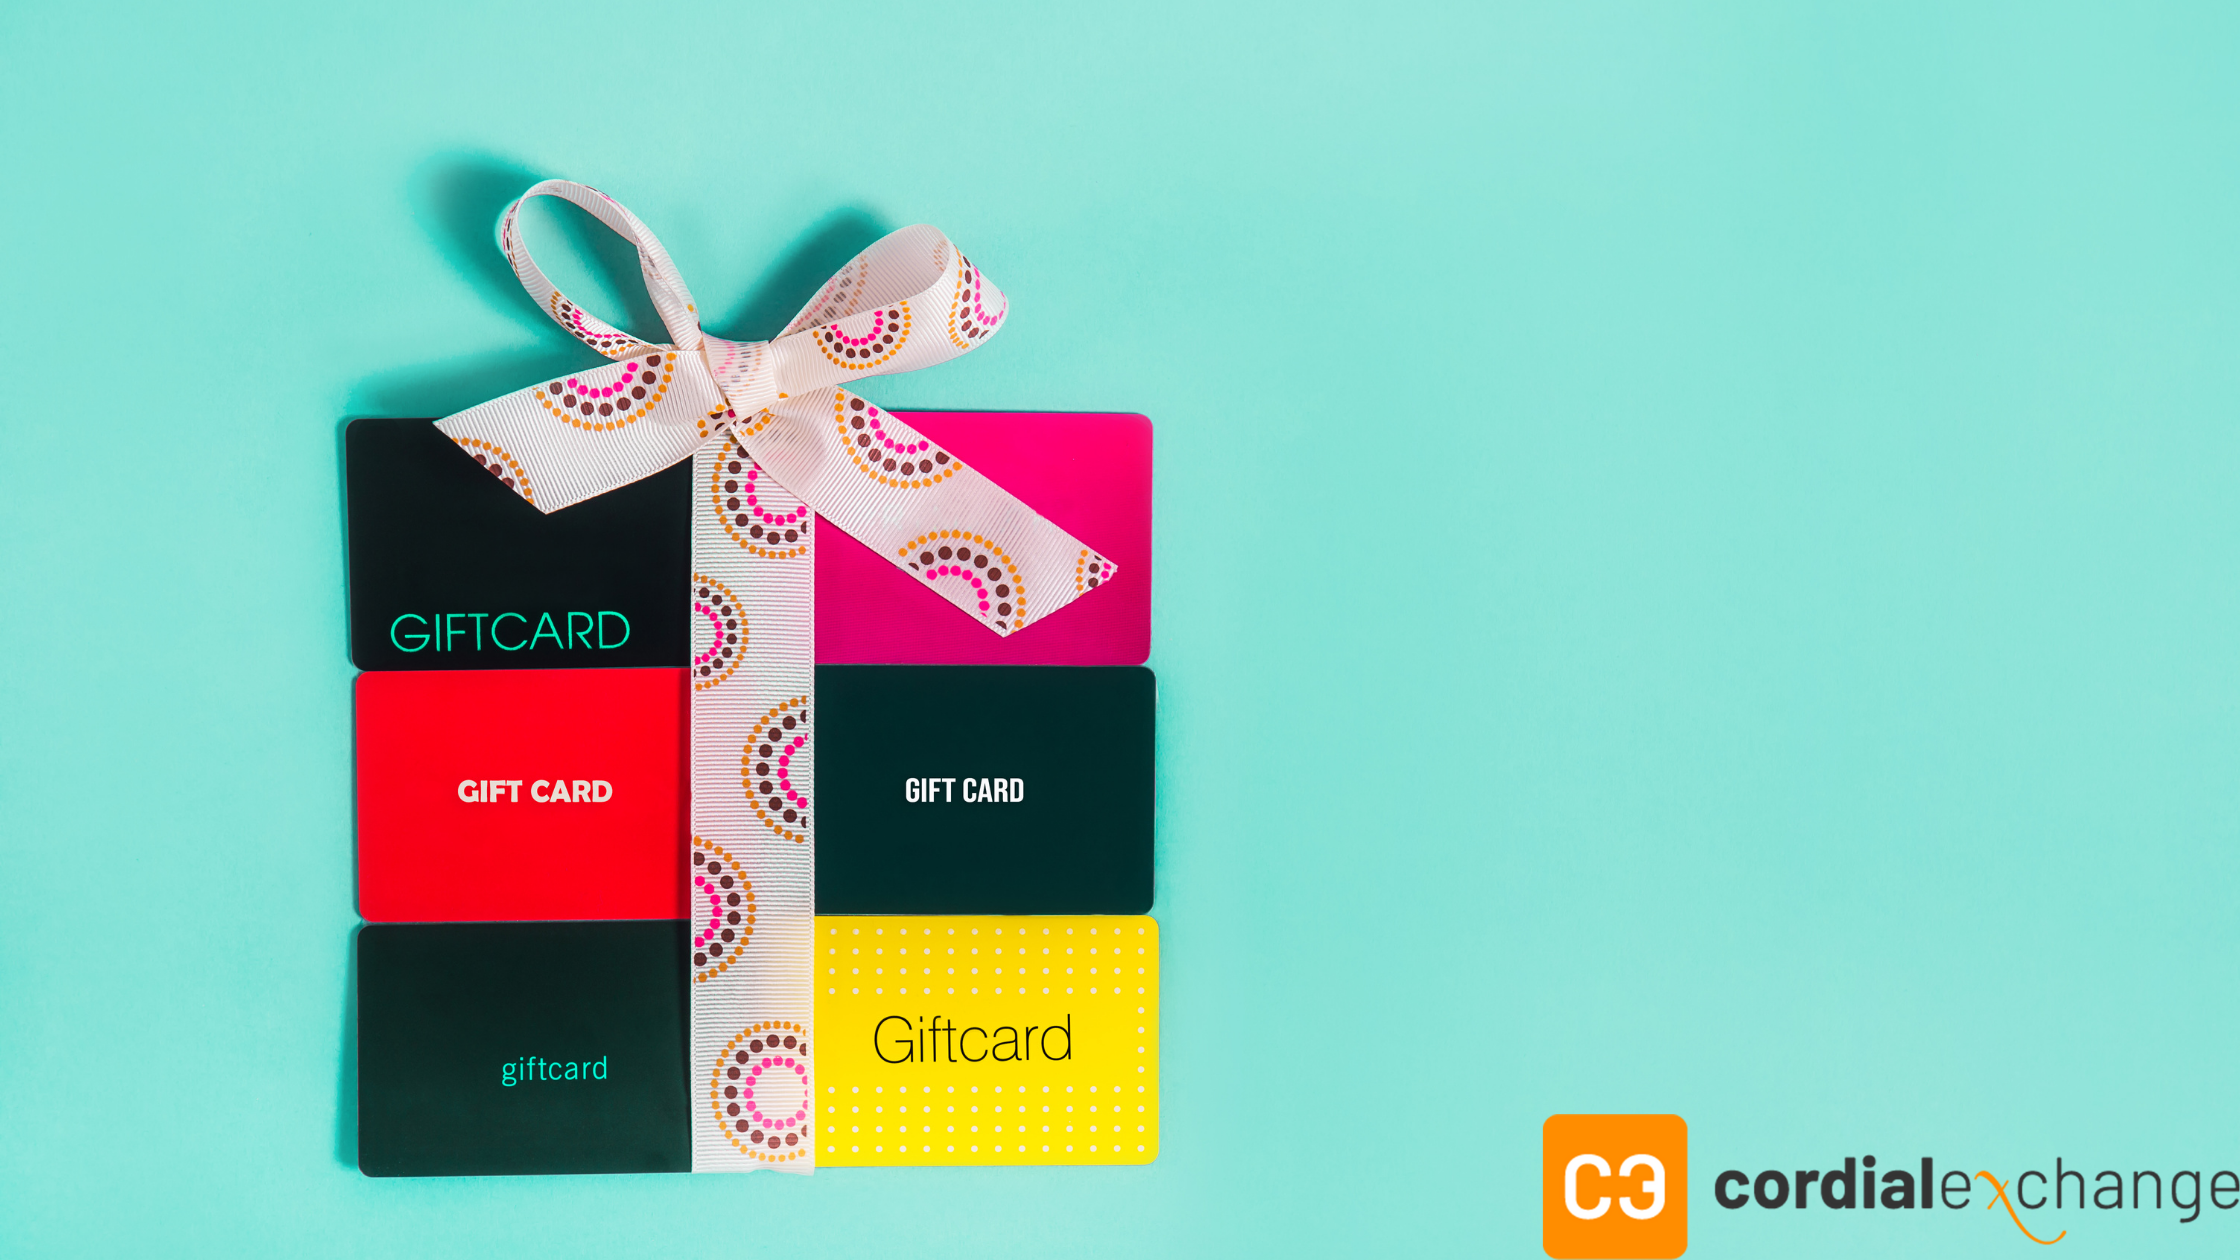 TRADING GIFTCARDS IN NIGERIA